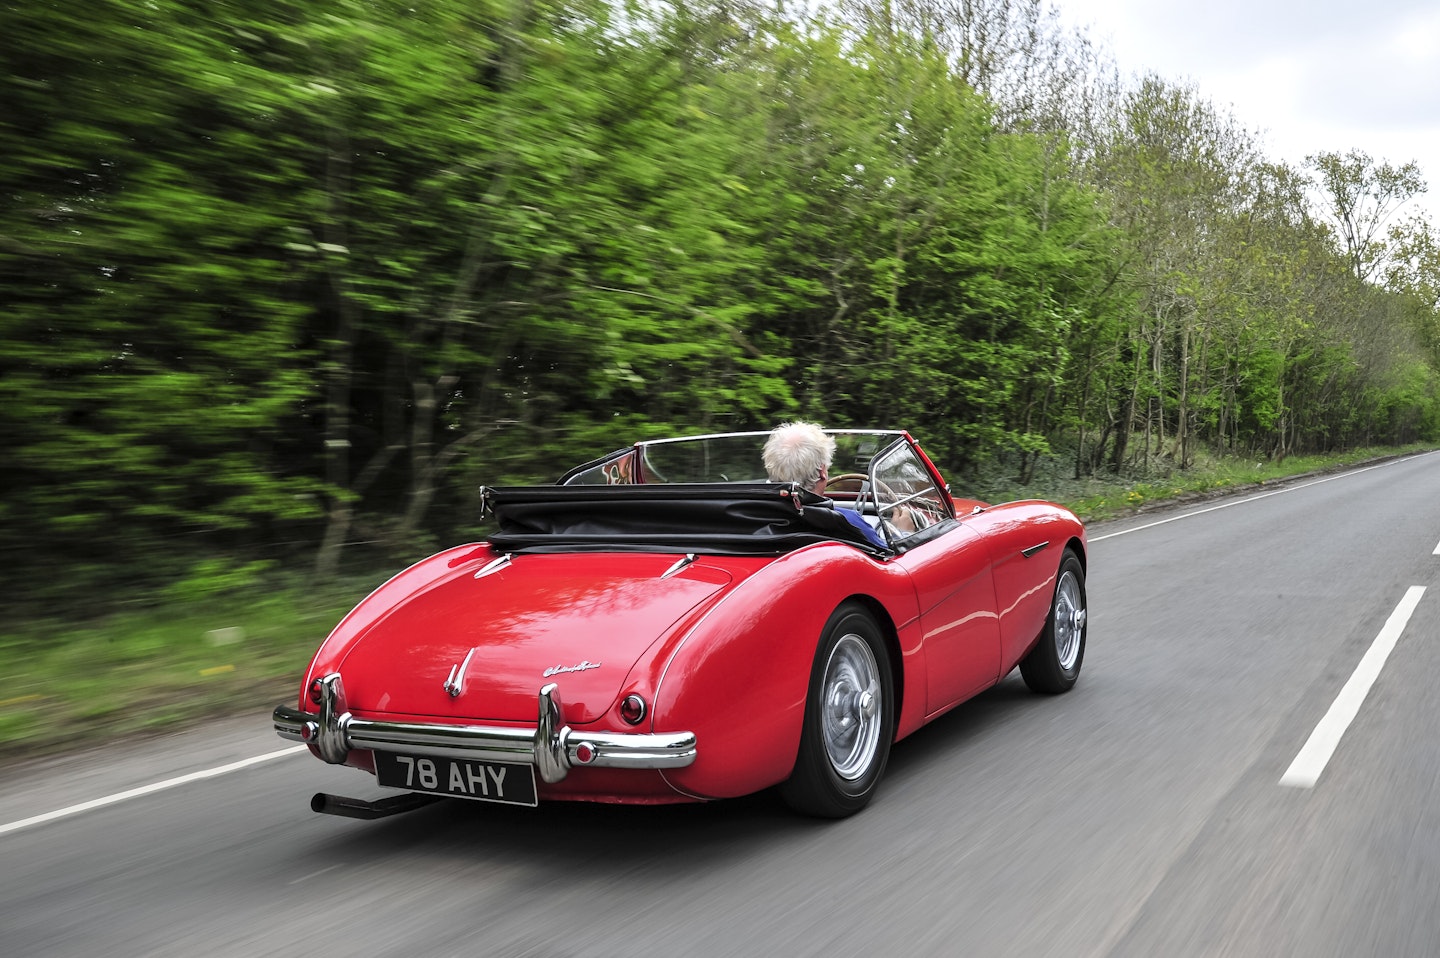 The Austin-Healey 100/4 conceals standard BMC bits beneath its voluptuous curves, so can it really be all that magical to drive? Nick Larkin clambers behind the wheel